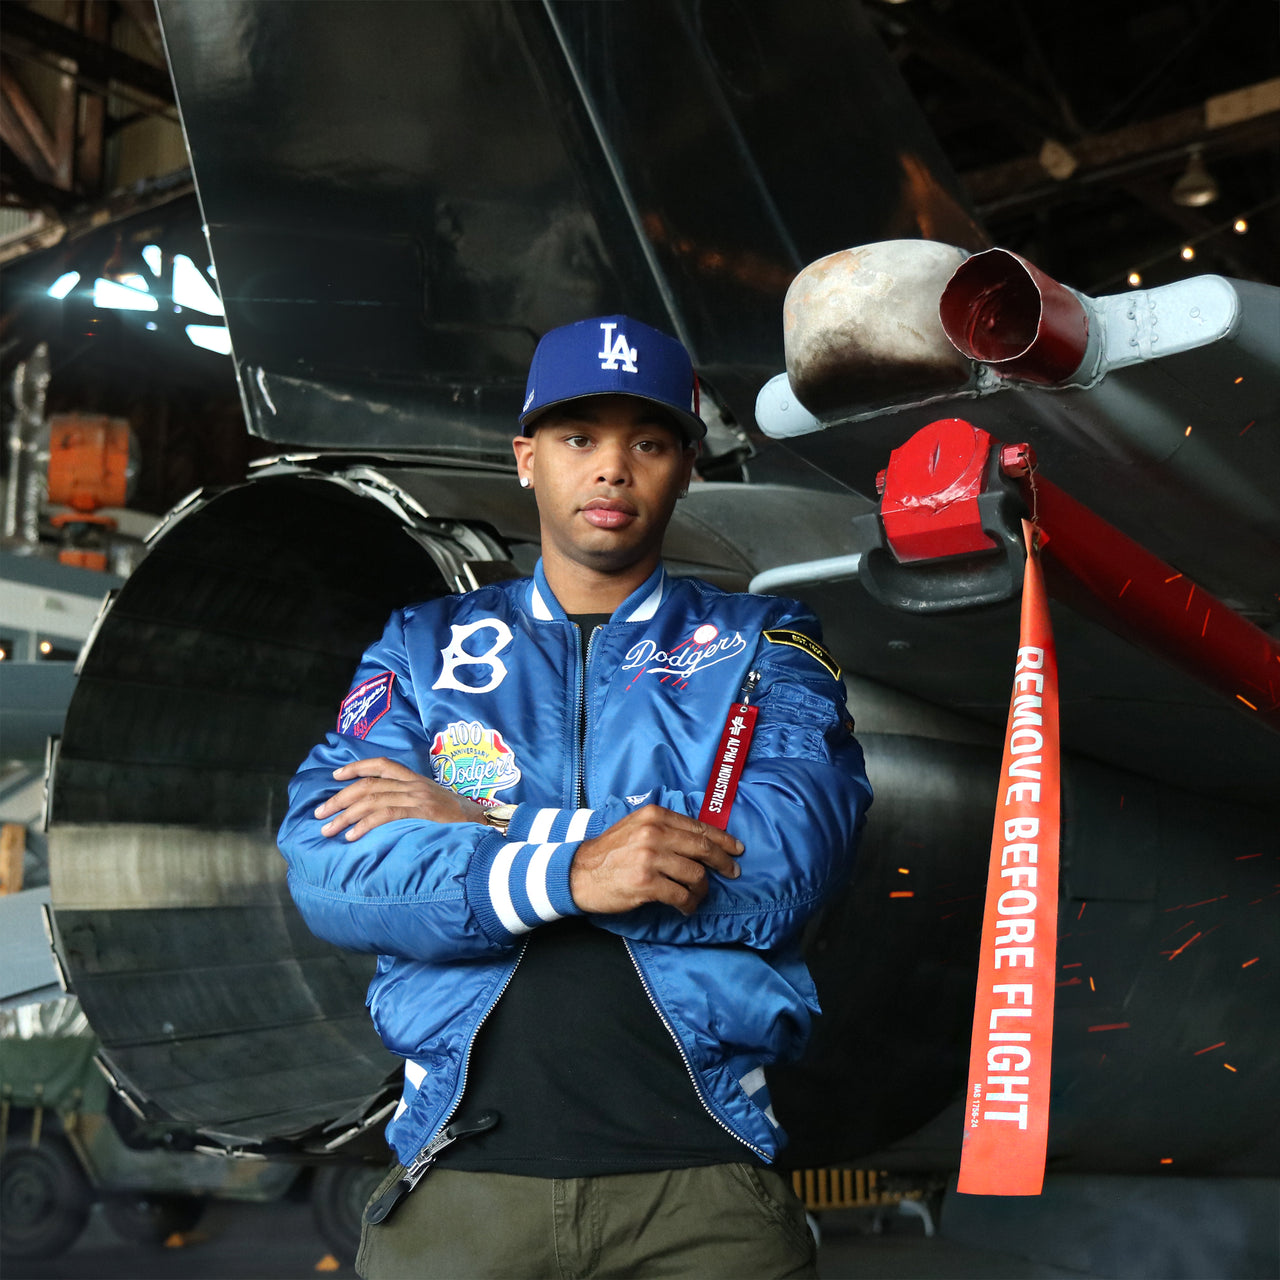 The Cooperstown Brooklyn Dodgers MLB Patch Alpha Industries Reversible Bomber Jacket With Camo Liner | Royal Blue Bomber Jacket in front of a jet